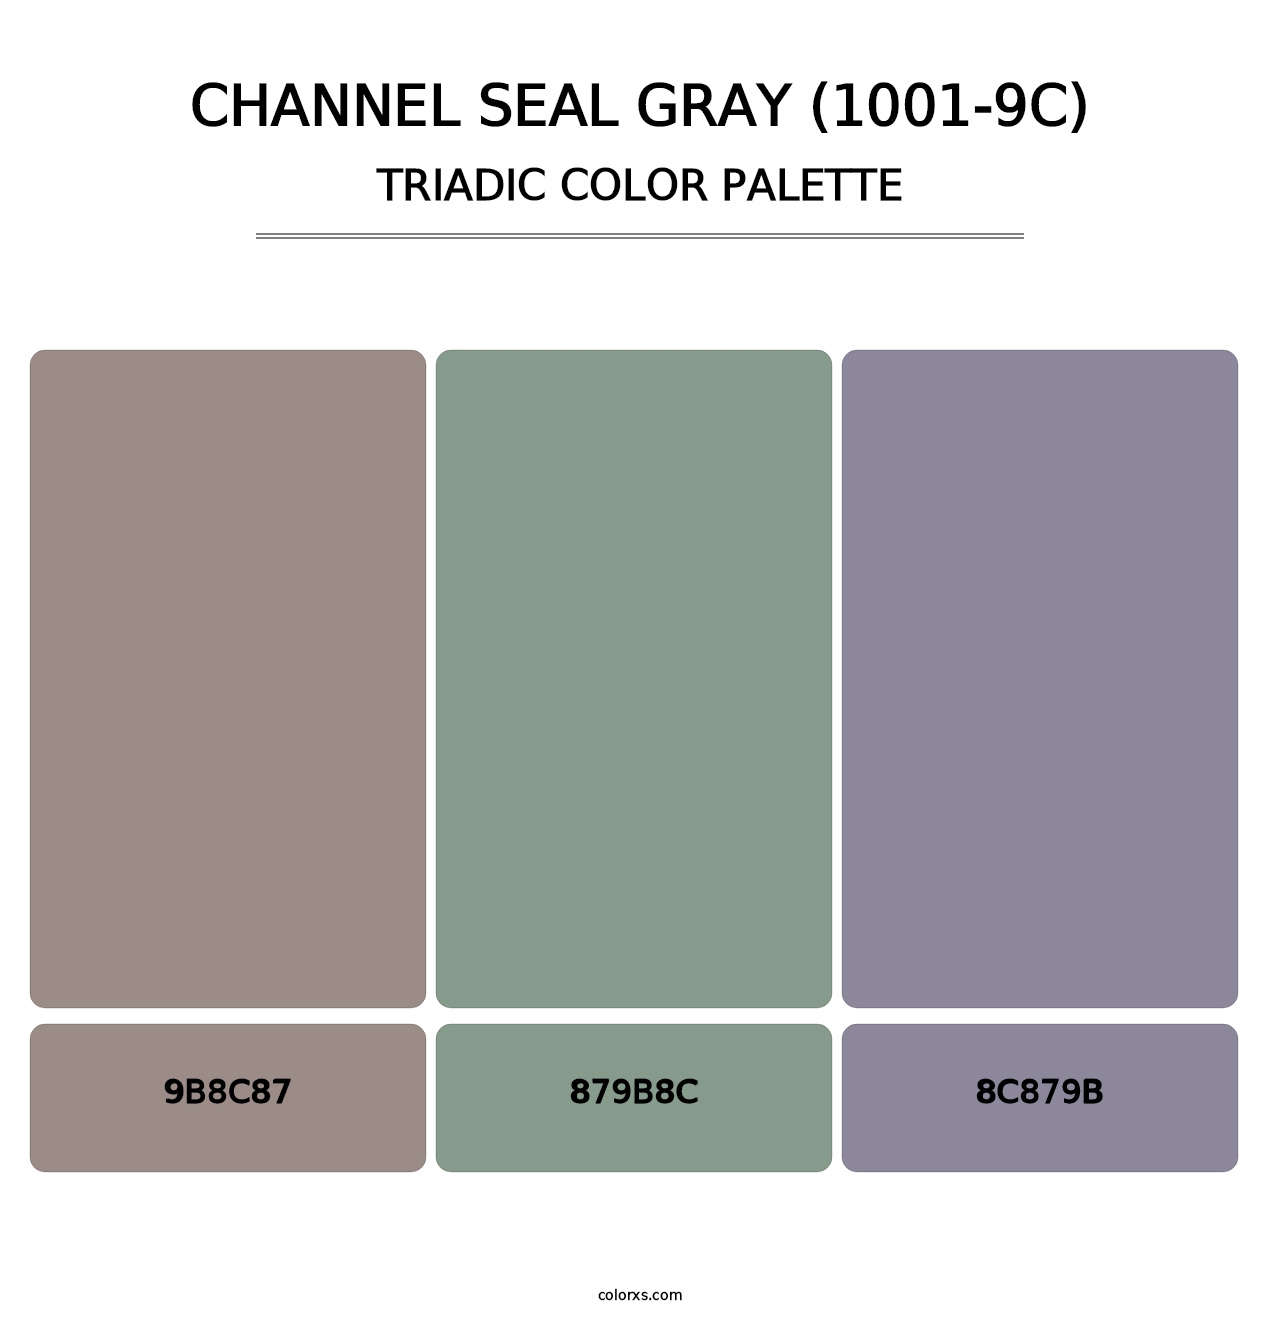 Channel Seal Gray (1001-9C) - Triadic Color Palette